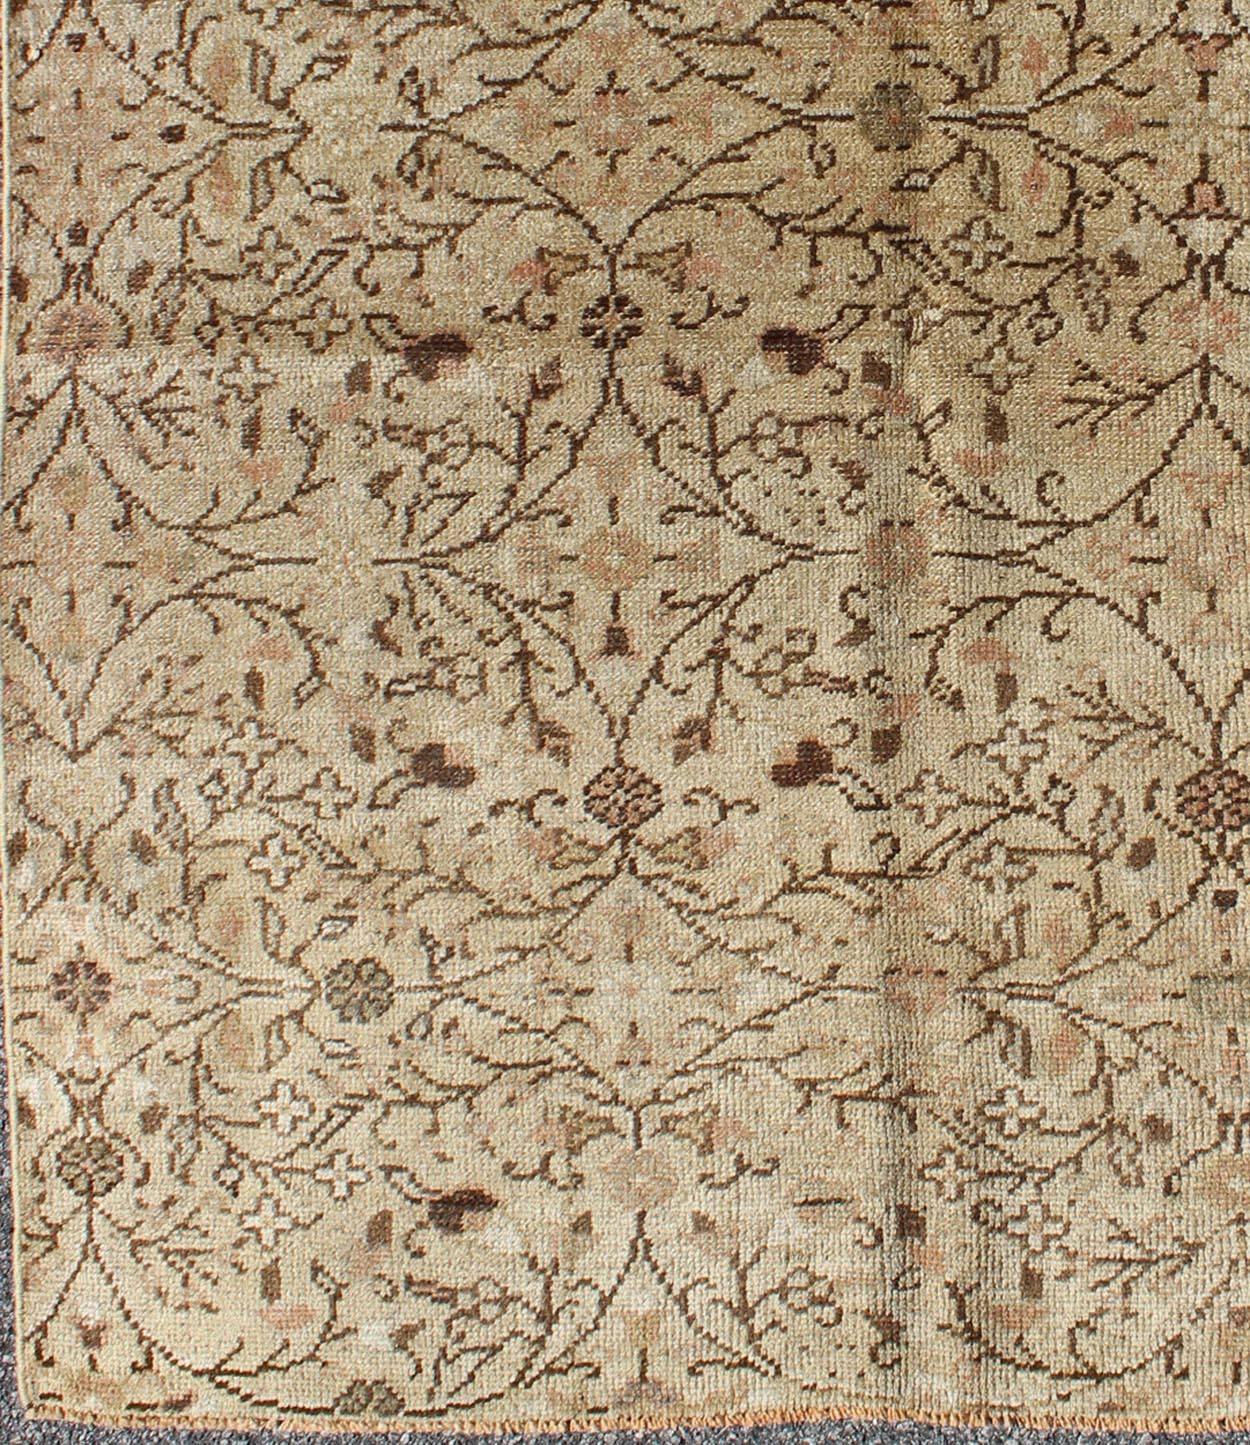 Vintage all-over floral design Turkish Oushak rug with free-flowing pattern, rug na-63970, country of origin / type: turkey / Oushak, circa mid-20th century

The design of this beautiful vintage Oushak rug from mid-20th century Turkey is enhanced